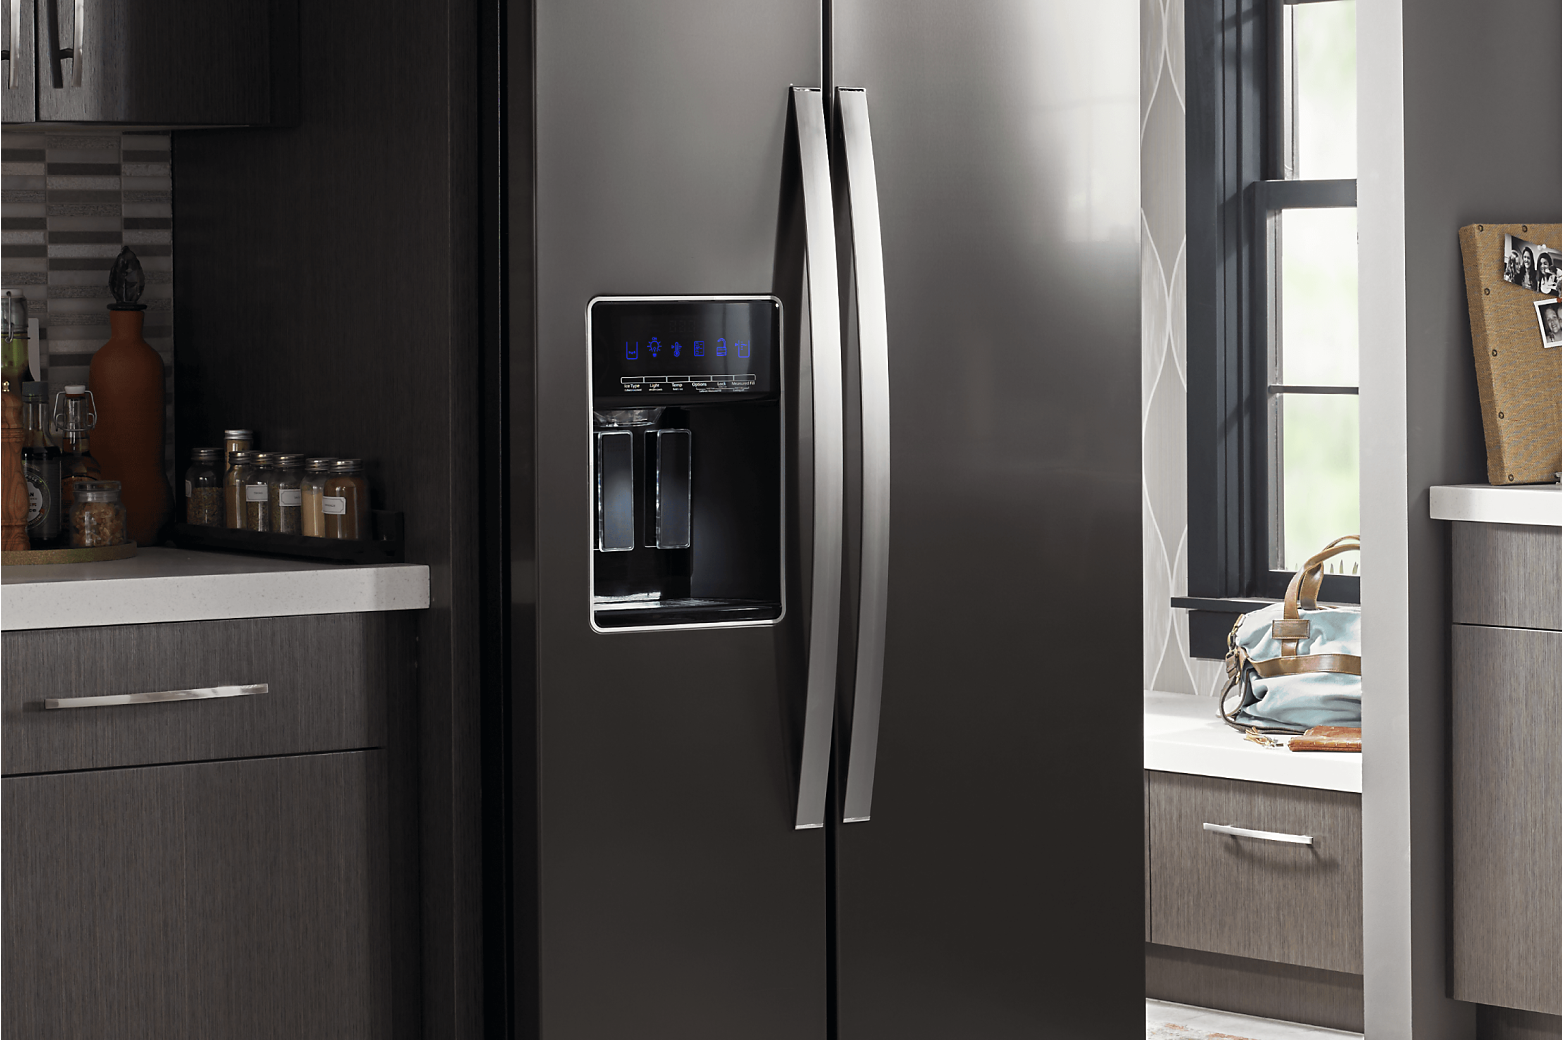 Gray side-by-side refrigerator with external ice maker